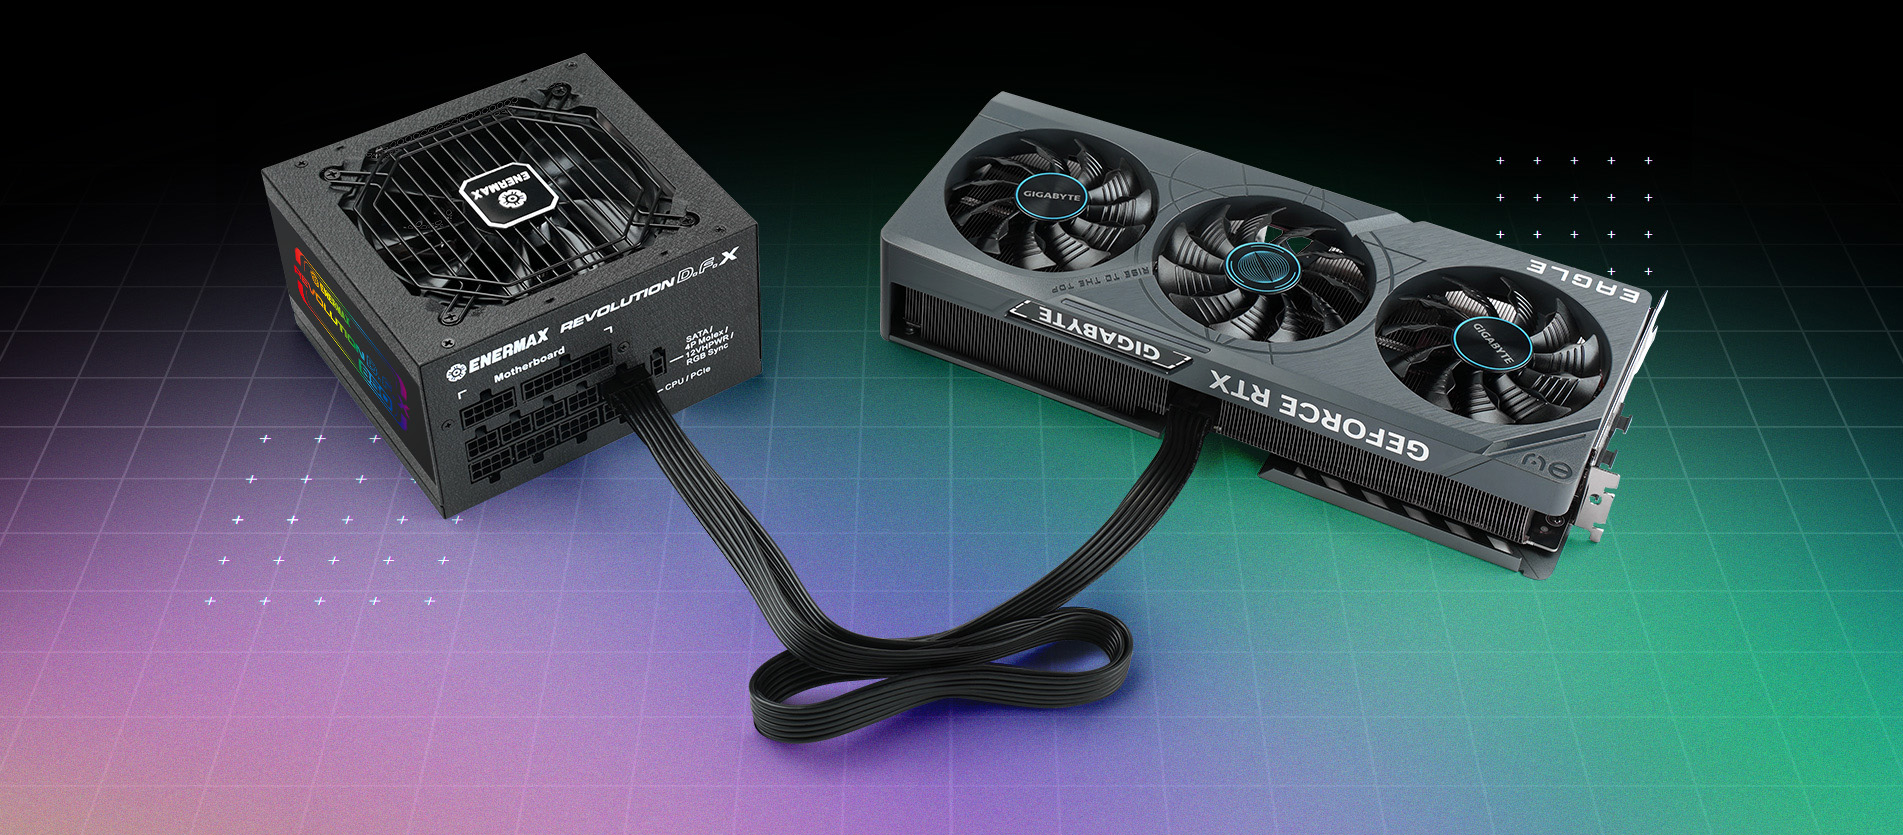 REVOLUTION D.F. X power supply support high-end GPU